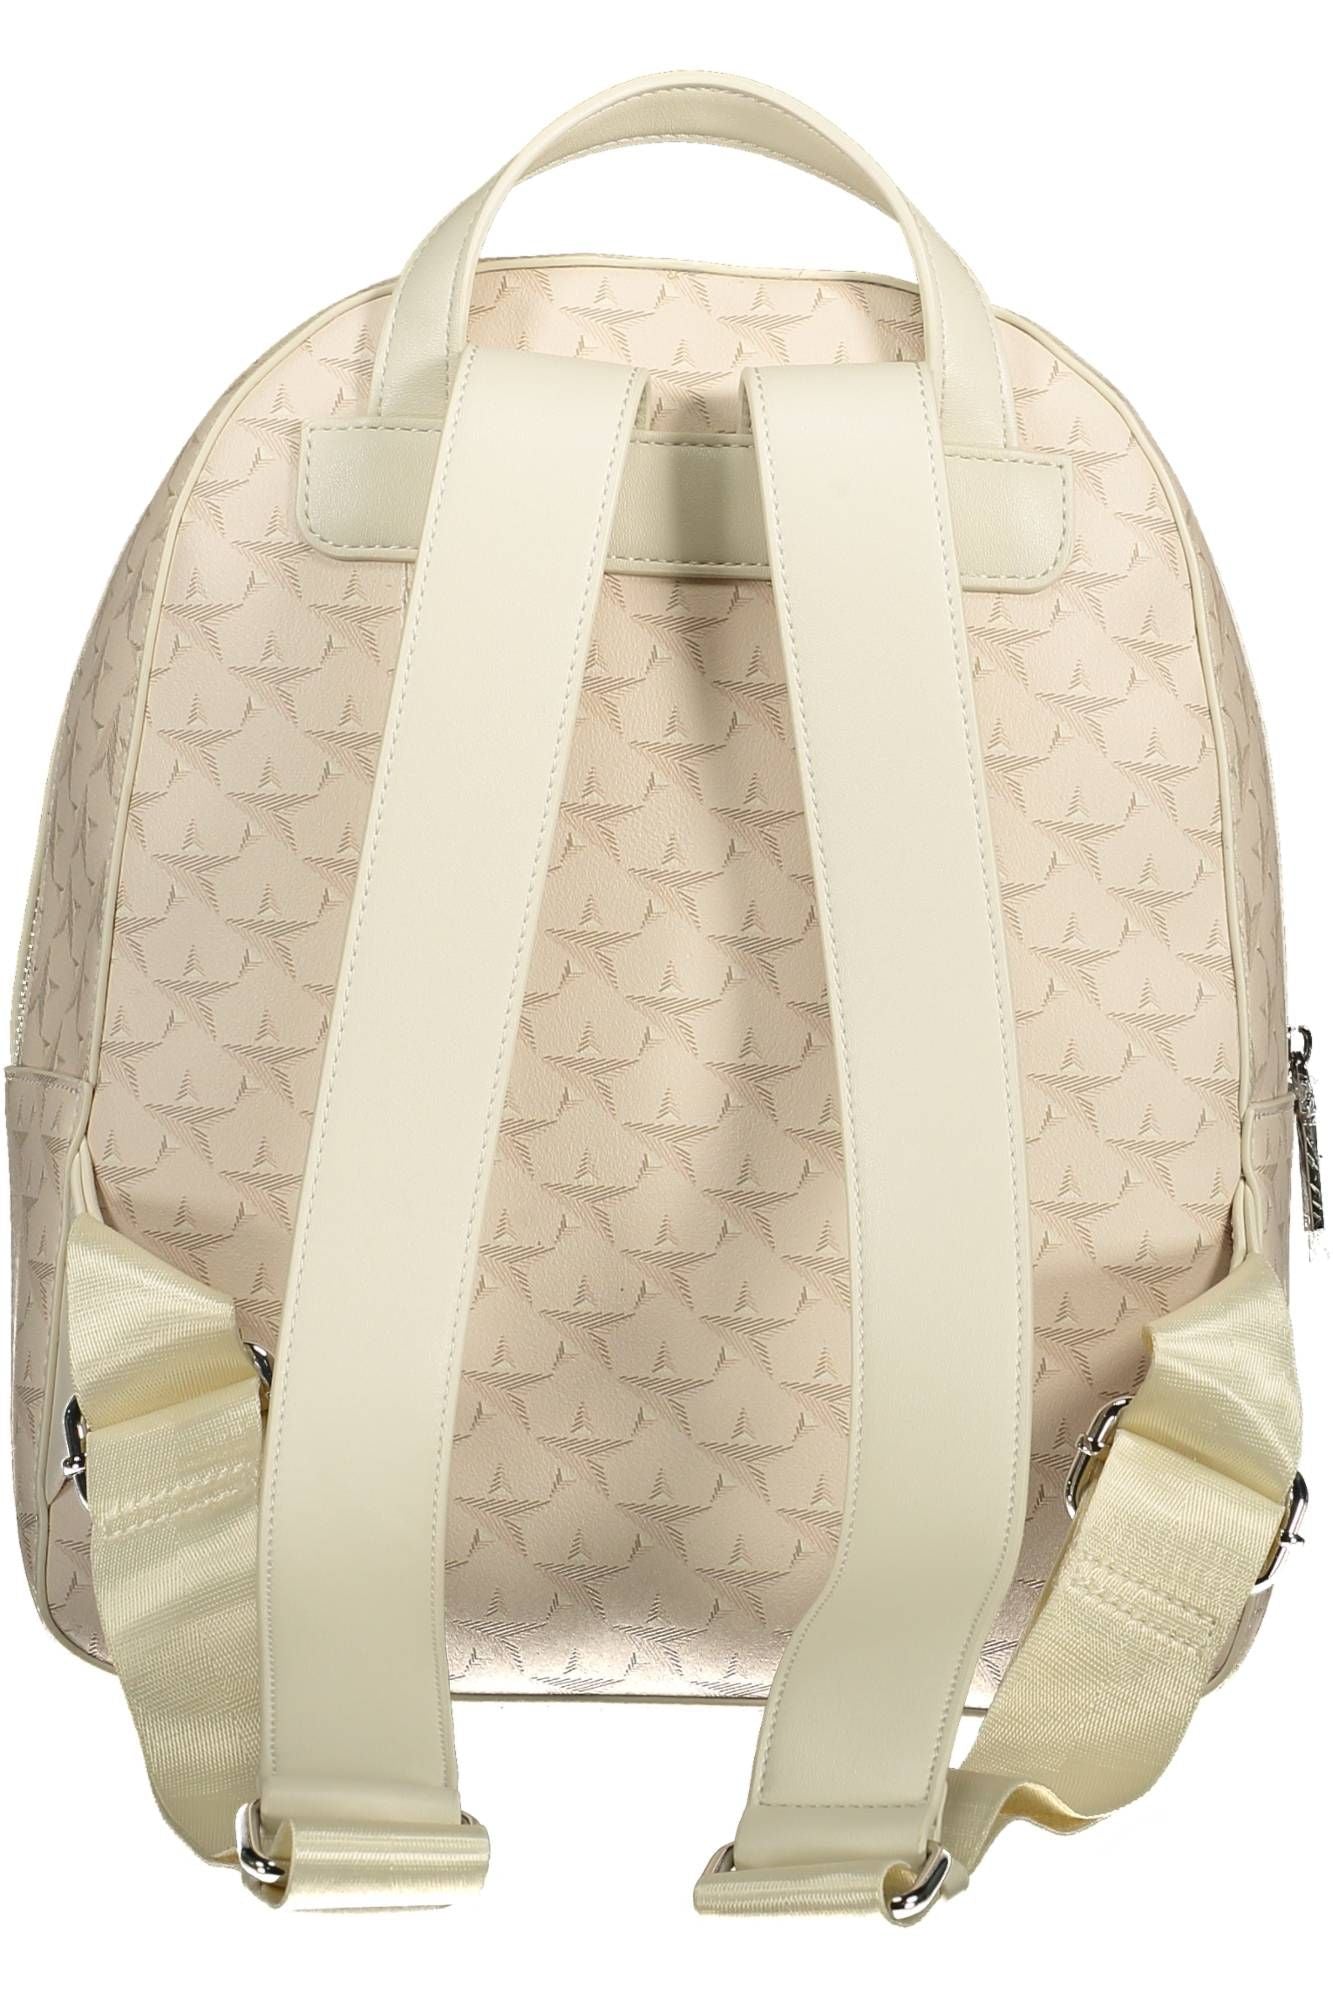 BYBLOS Elegant Beige Backpack with Contrasting Accents